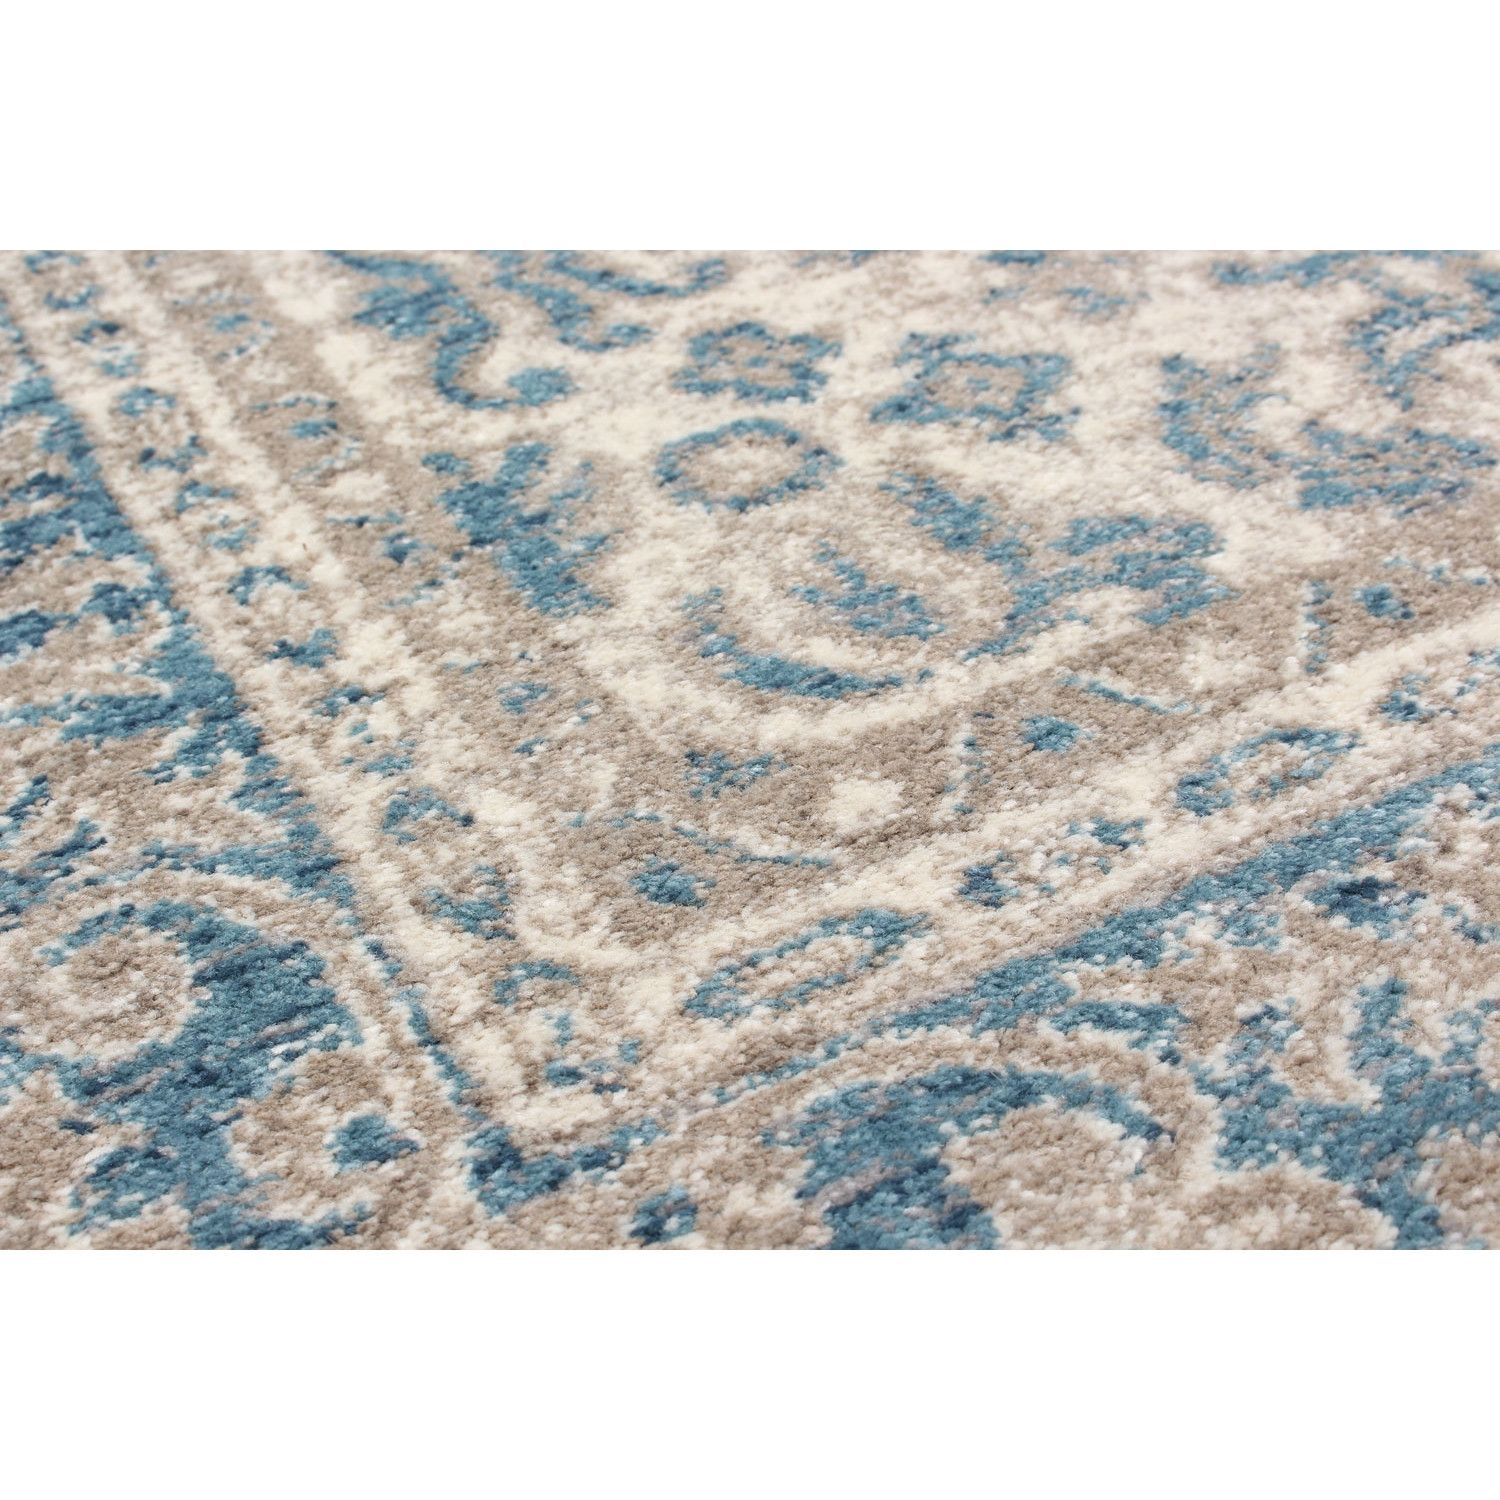 Rugs 8×10 Area Rugs Cheap For Floor And Complements Any Decor In Discount Wool Area Rugs (Photo 1 of 15)